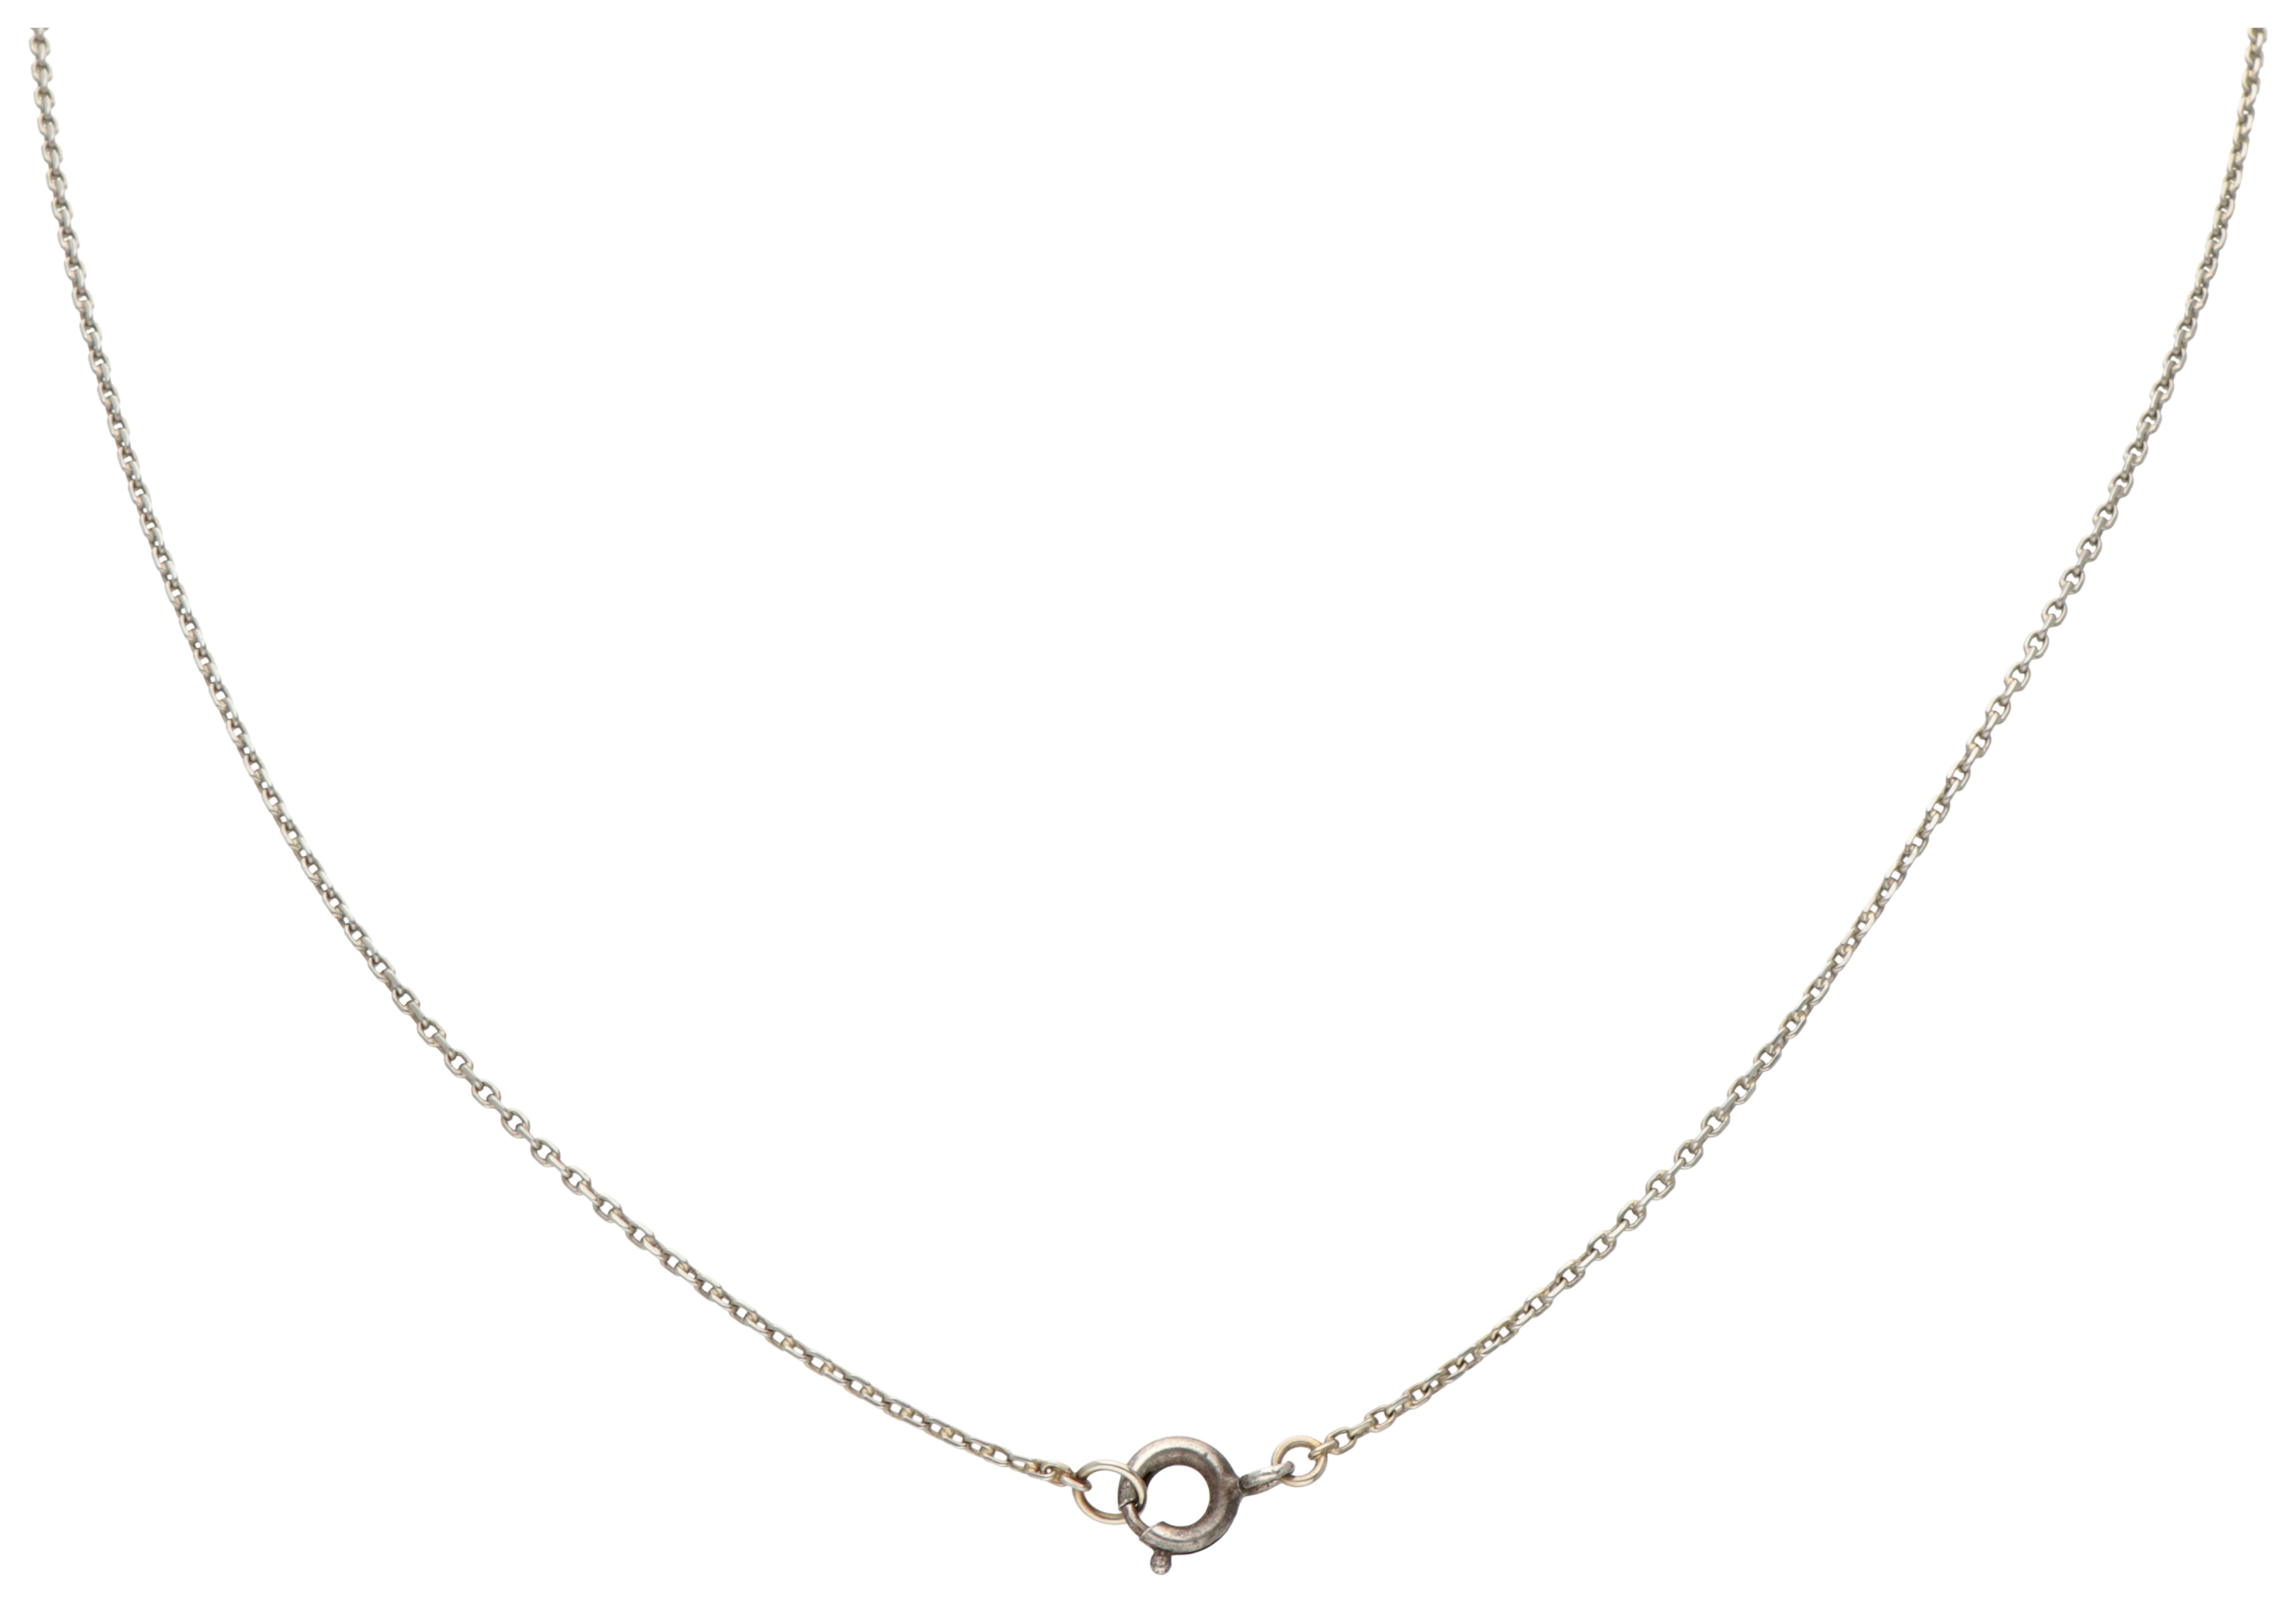 14K. White gold Art Deco pendant set with rose cut diamonds and necklace.  - Image 3 of 3